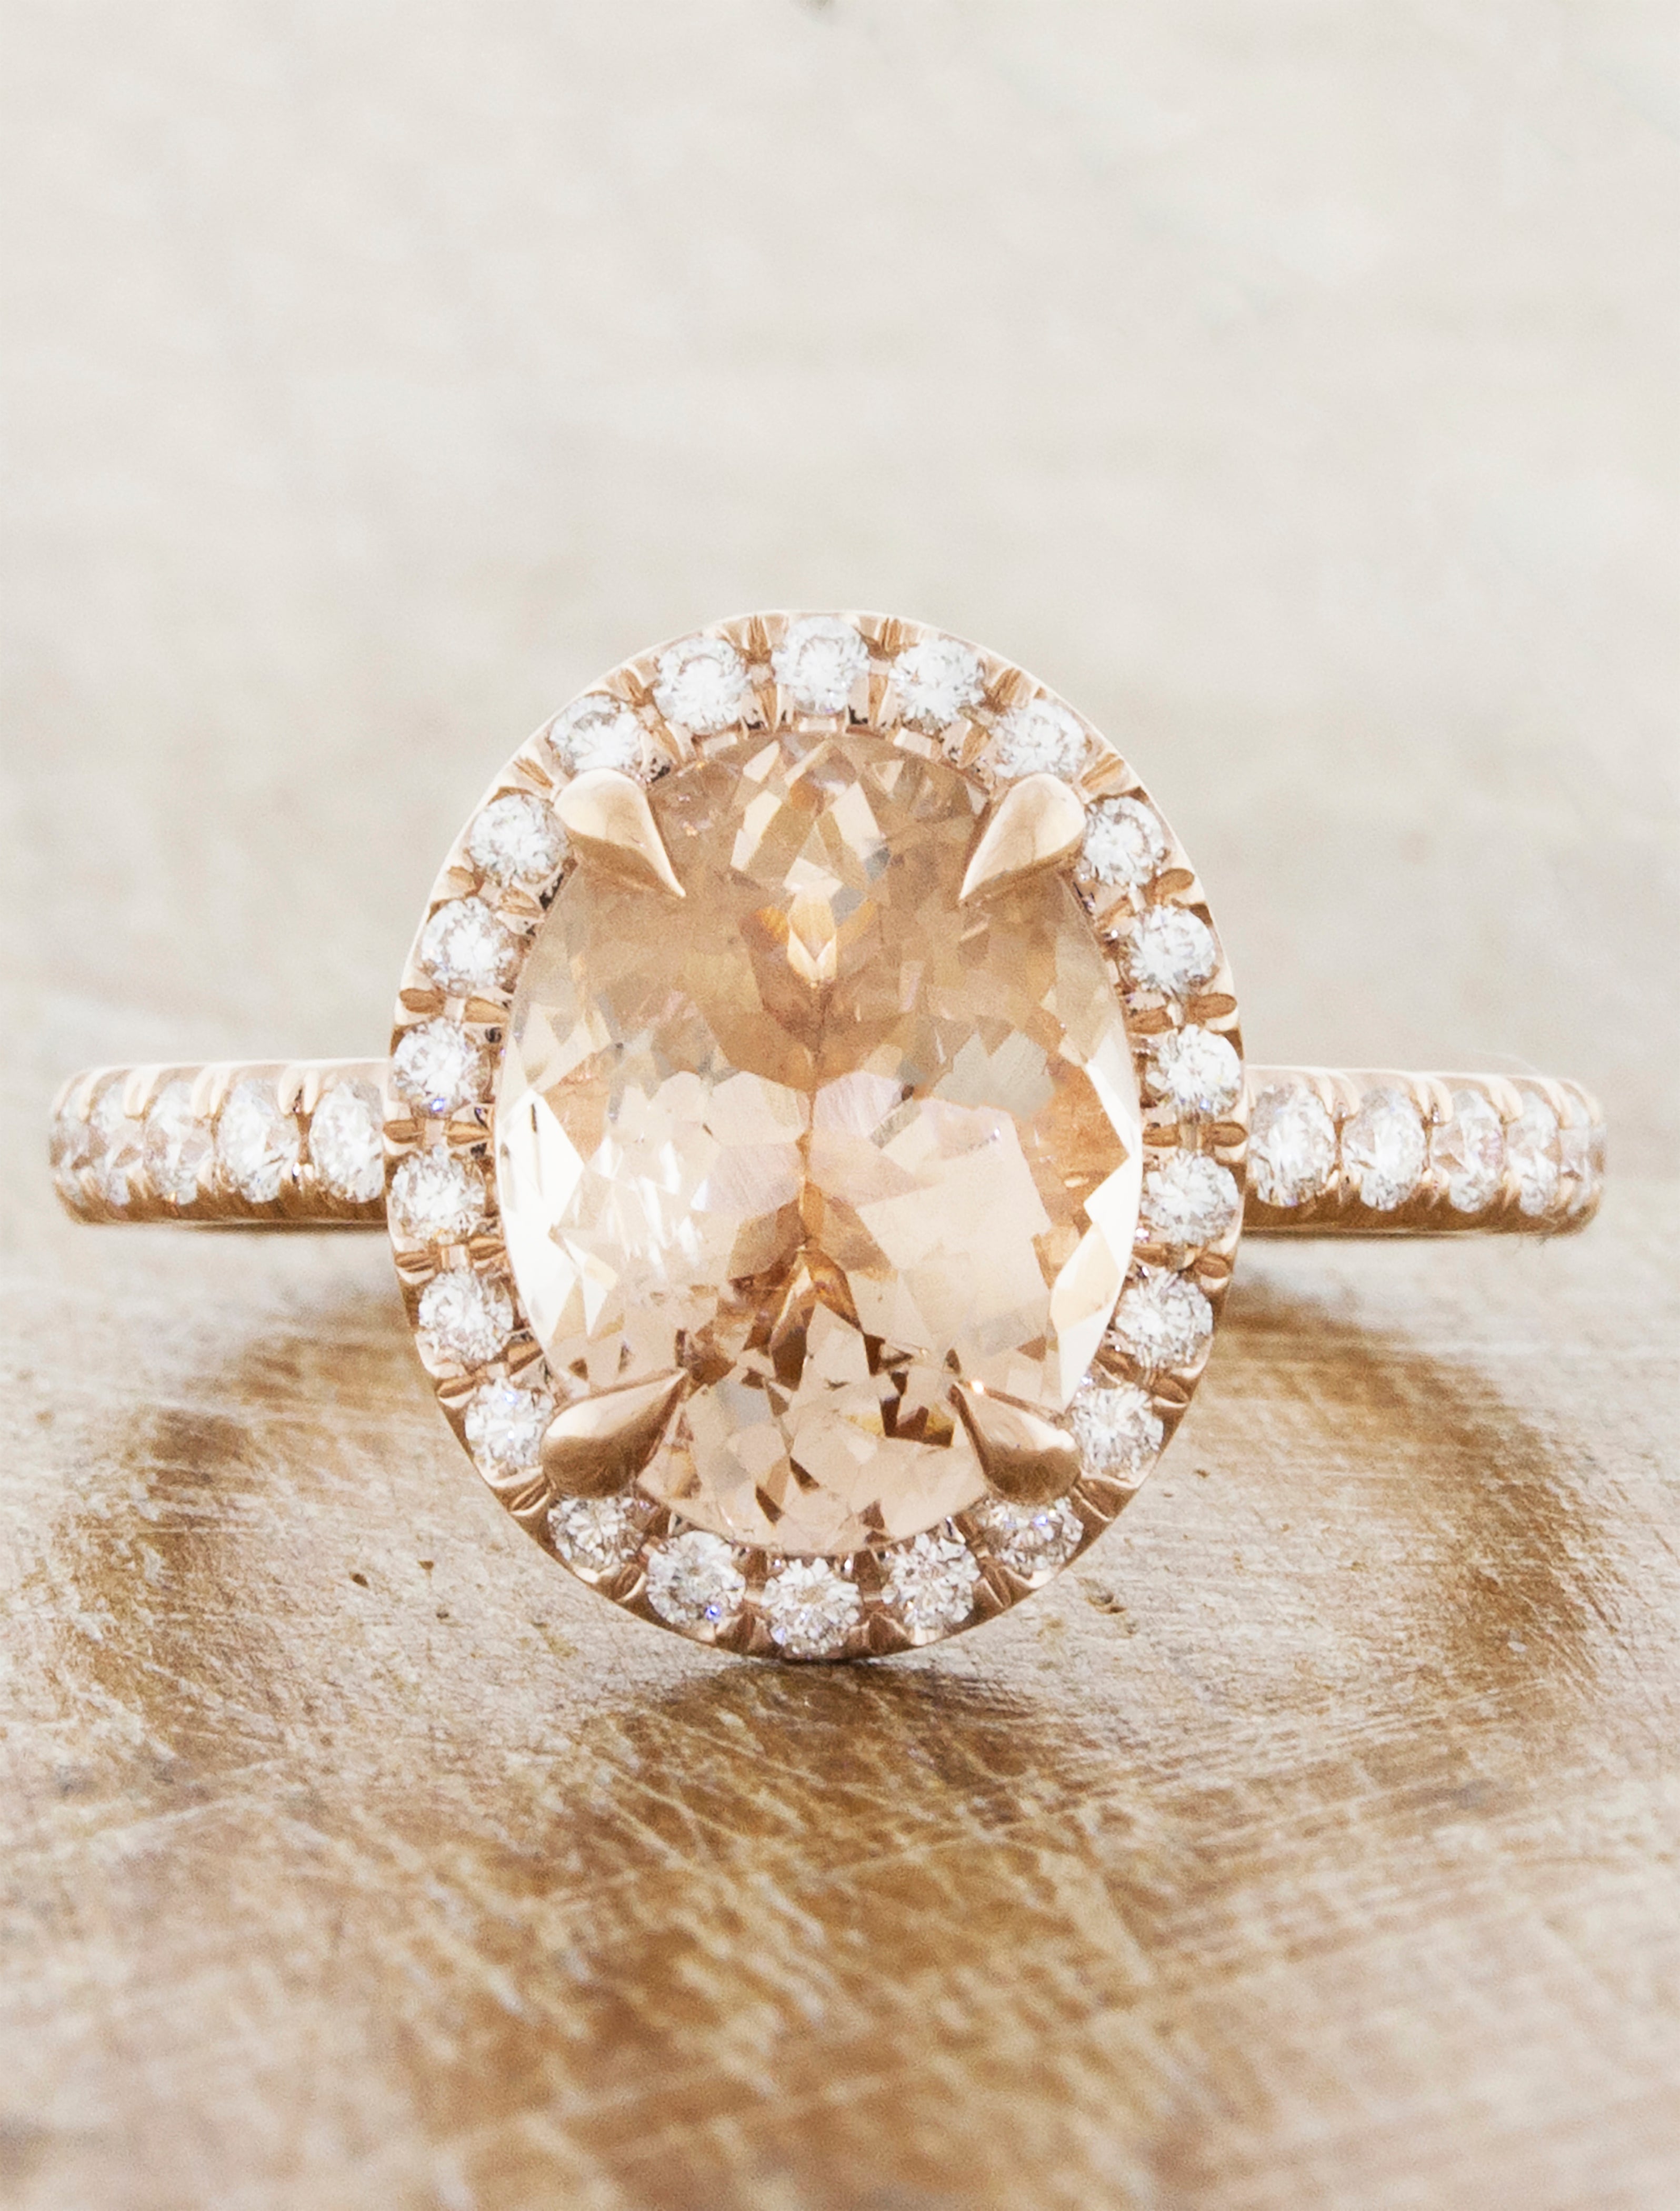 46 Colored Engagement Rings That Stand Out on Your Hand